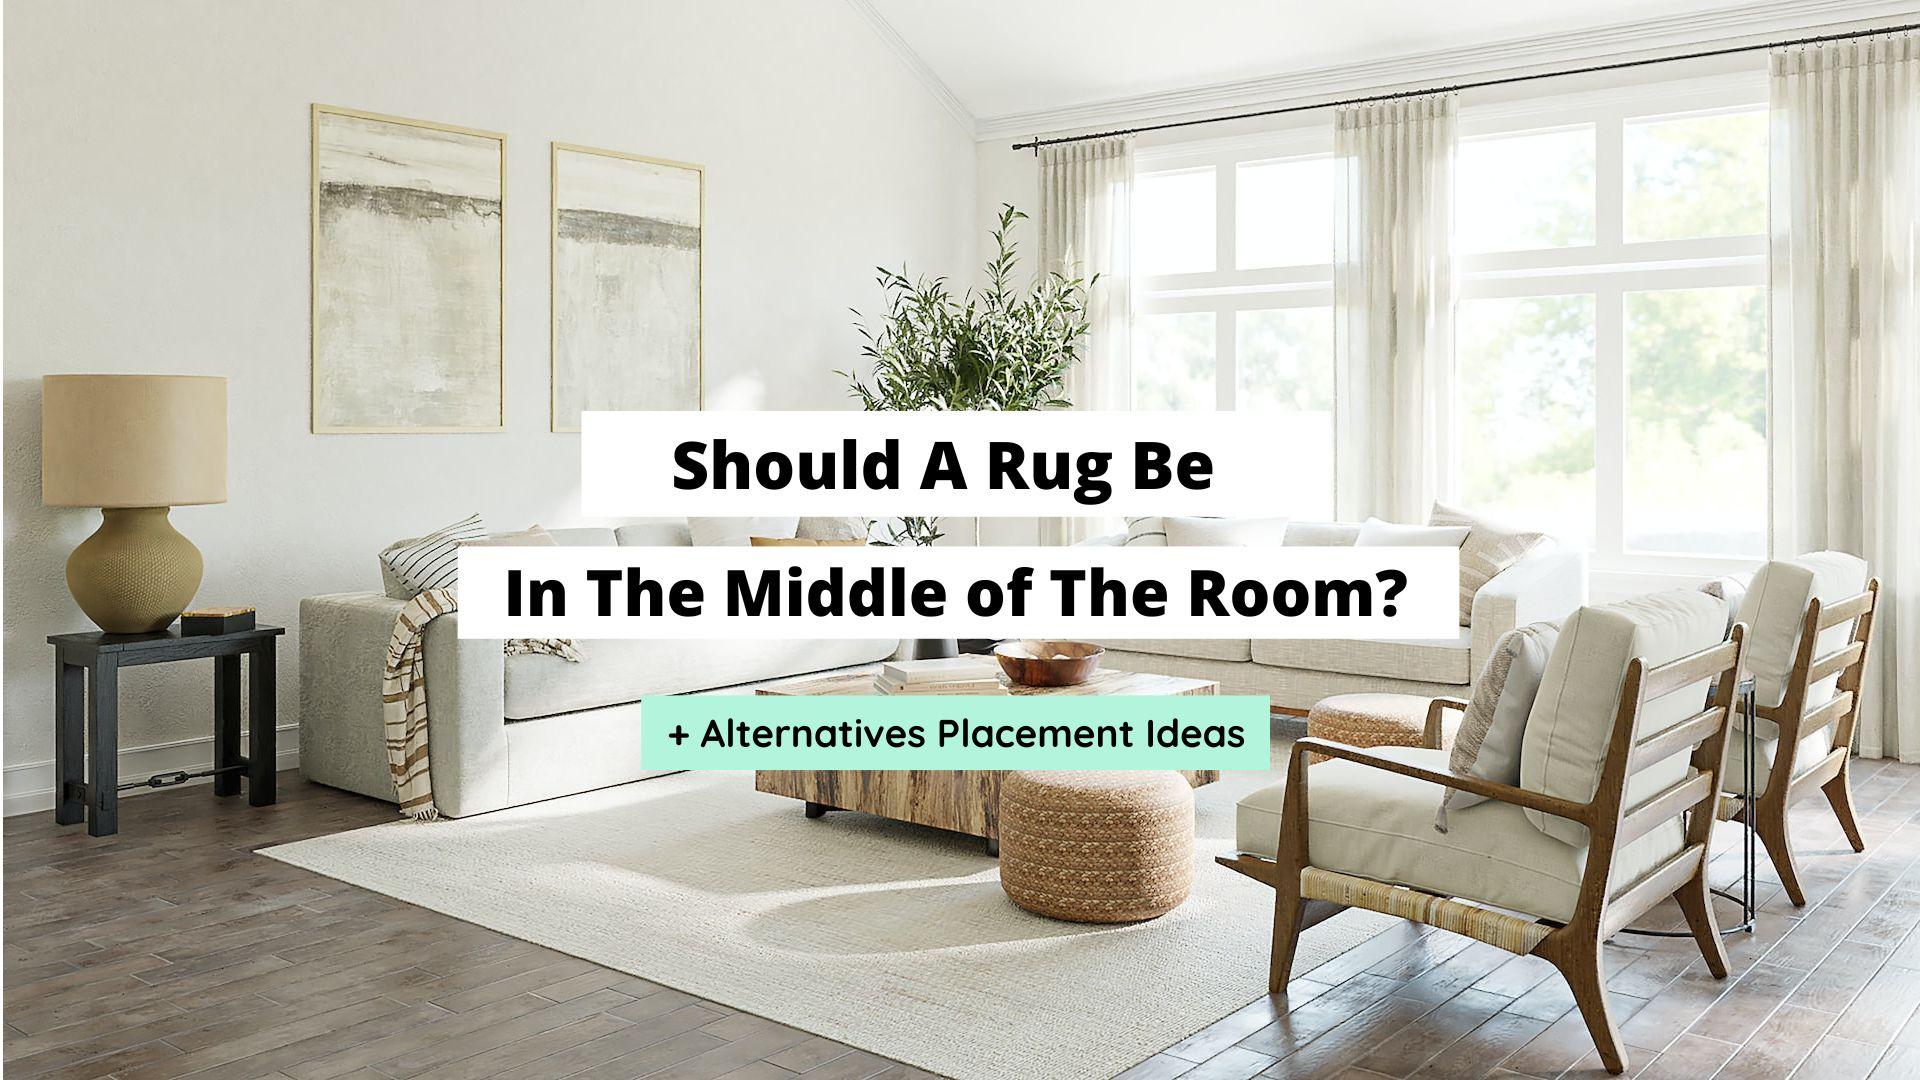 Should A Rug Be In The Middle of The Room